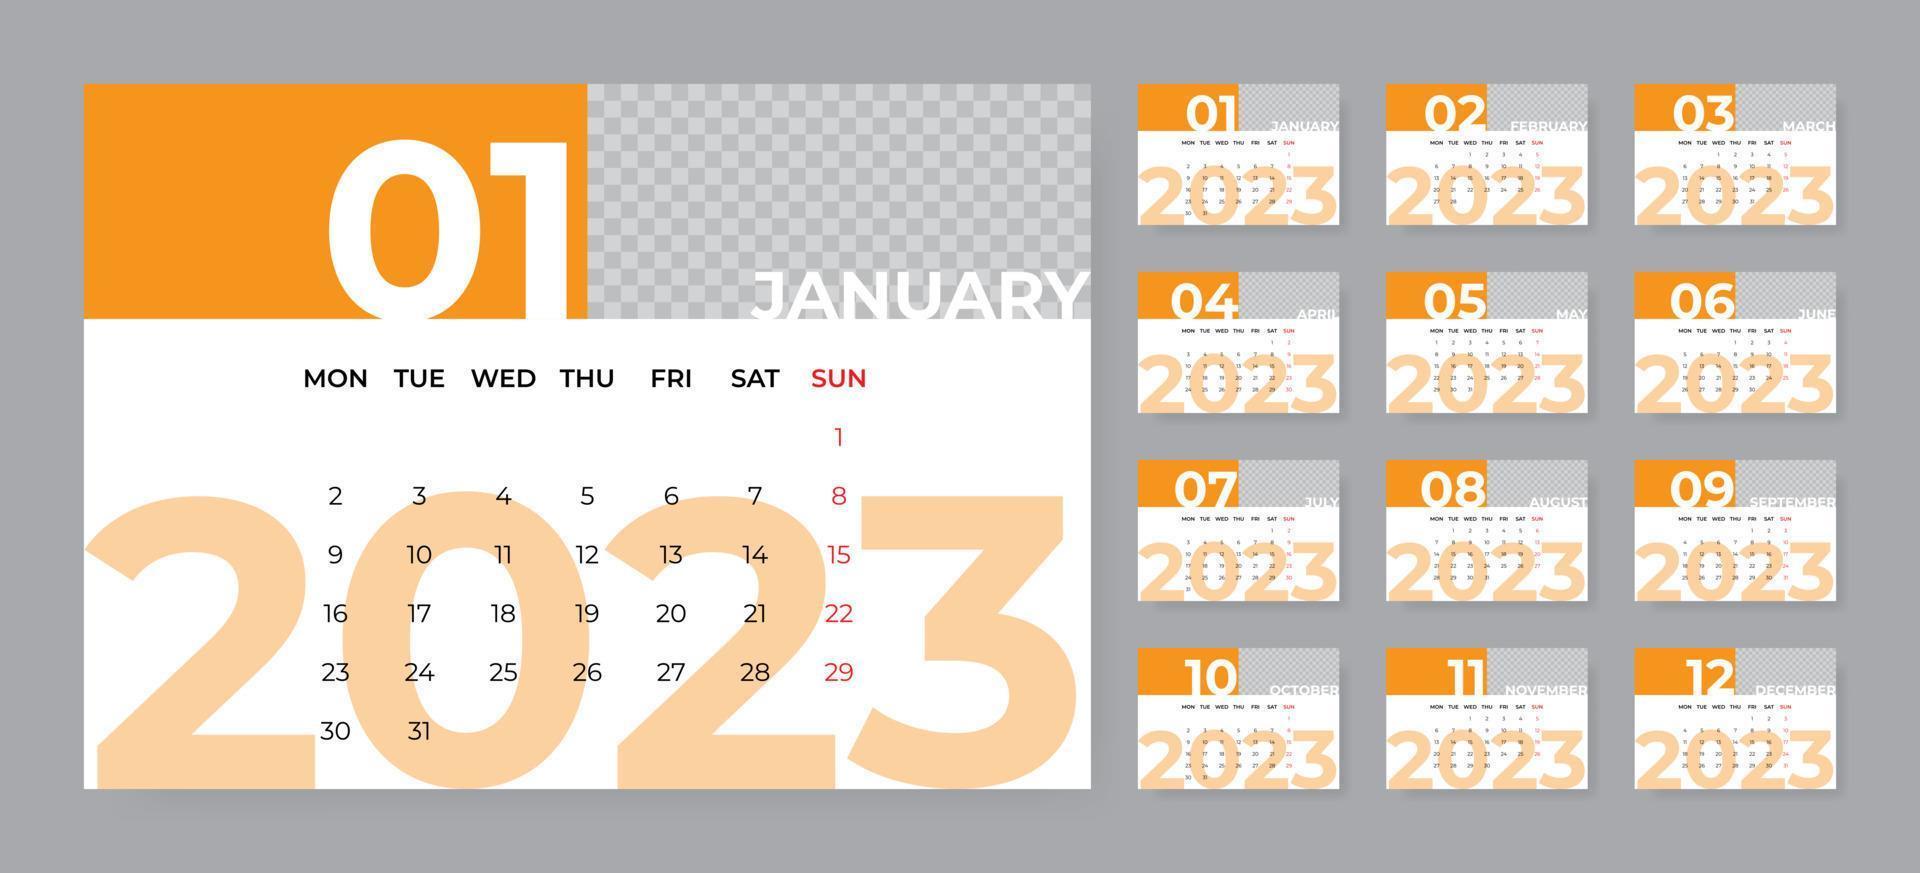 Monthly desk calendar template for 2023 year. Week starts on Monday vector